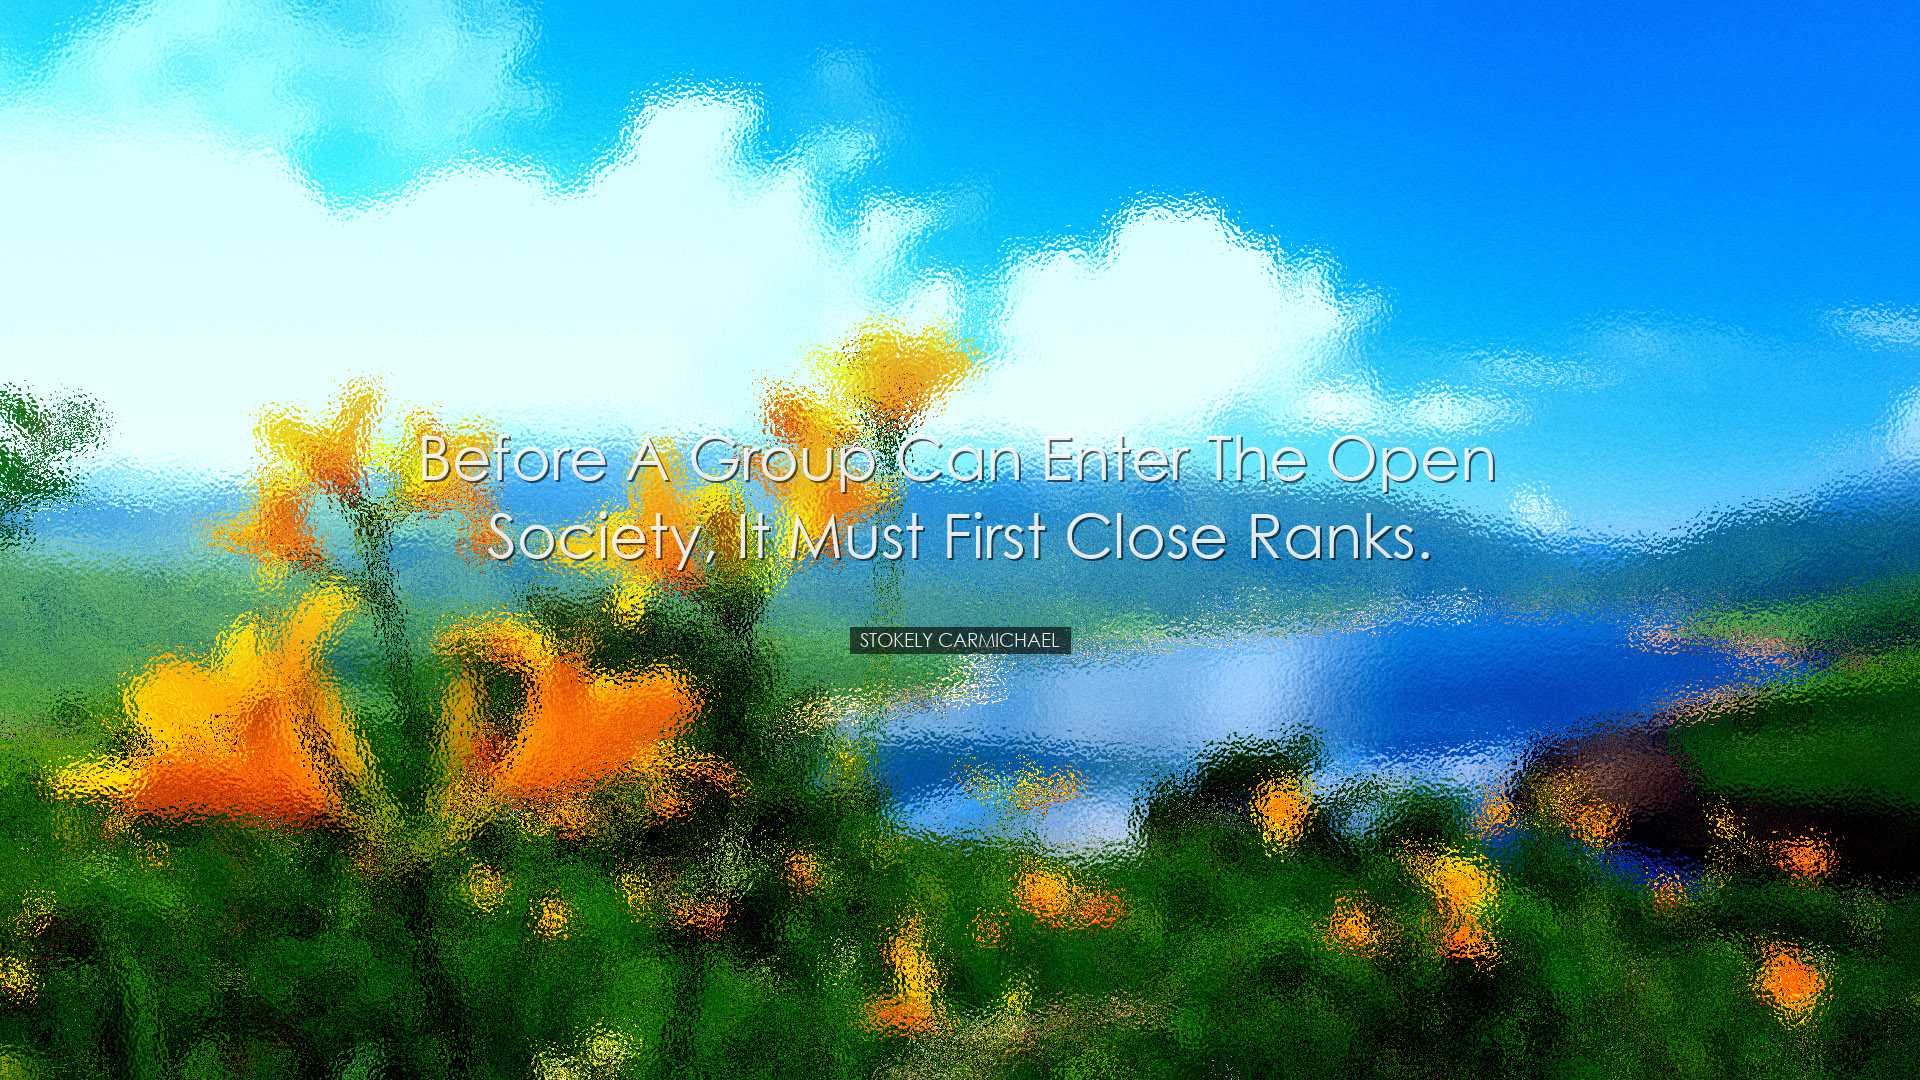 Before a group can enter the open society, it must first close ran